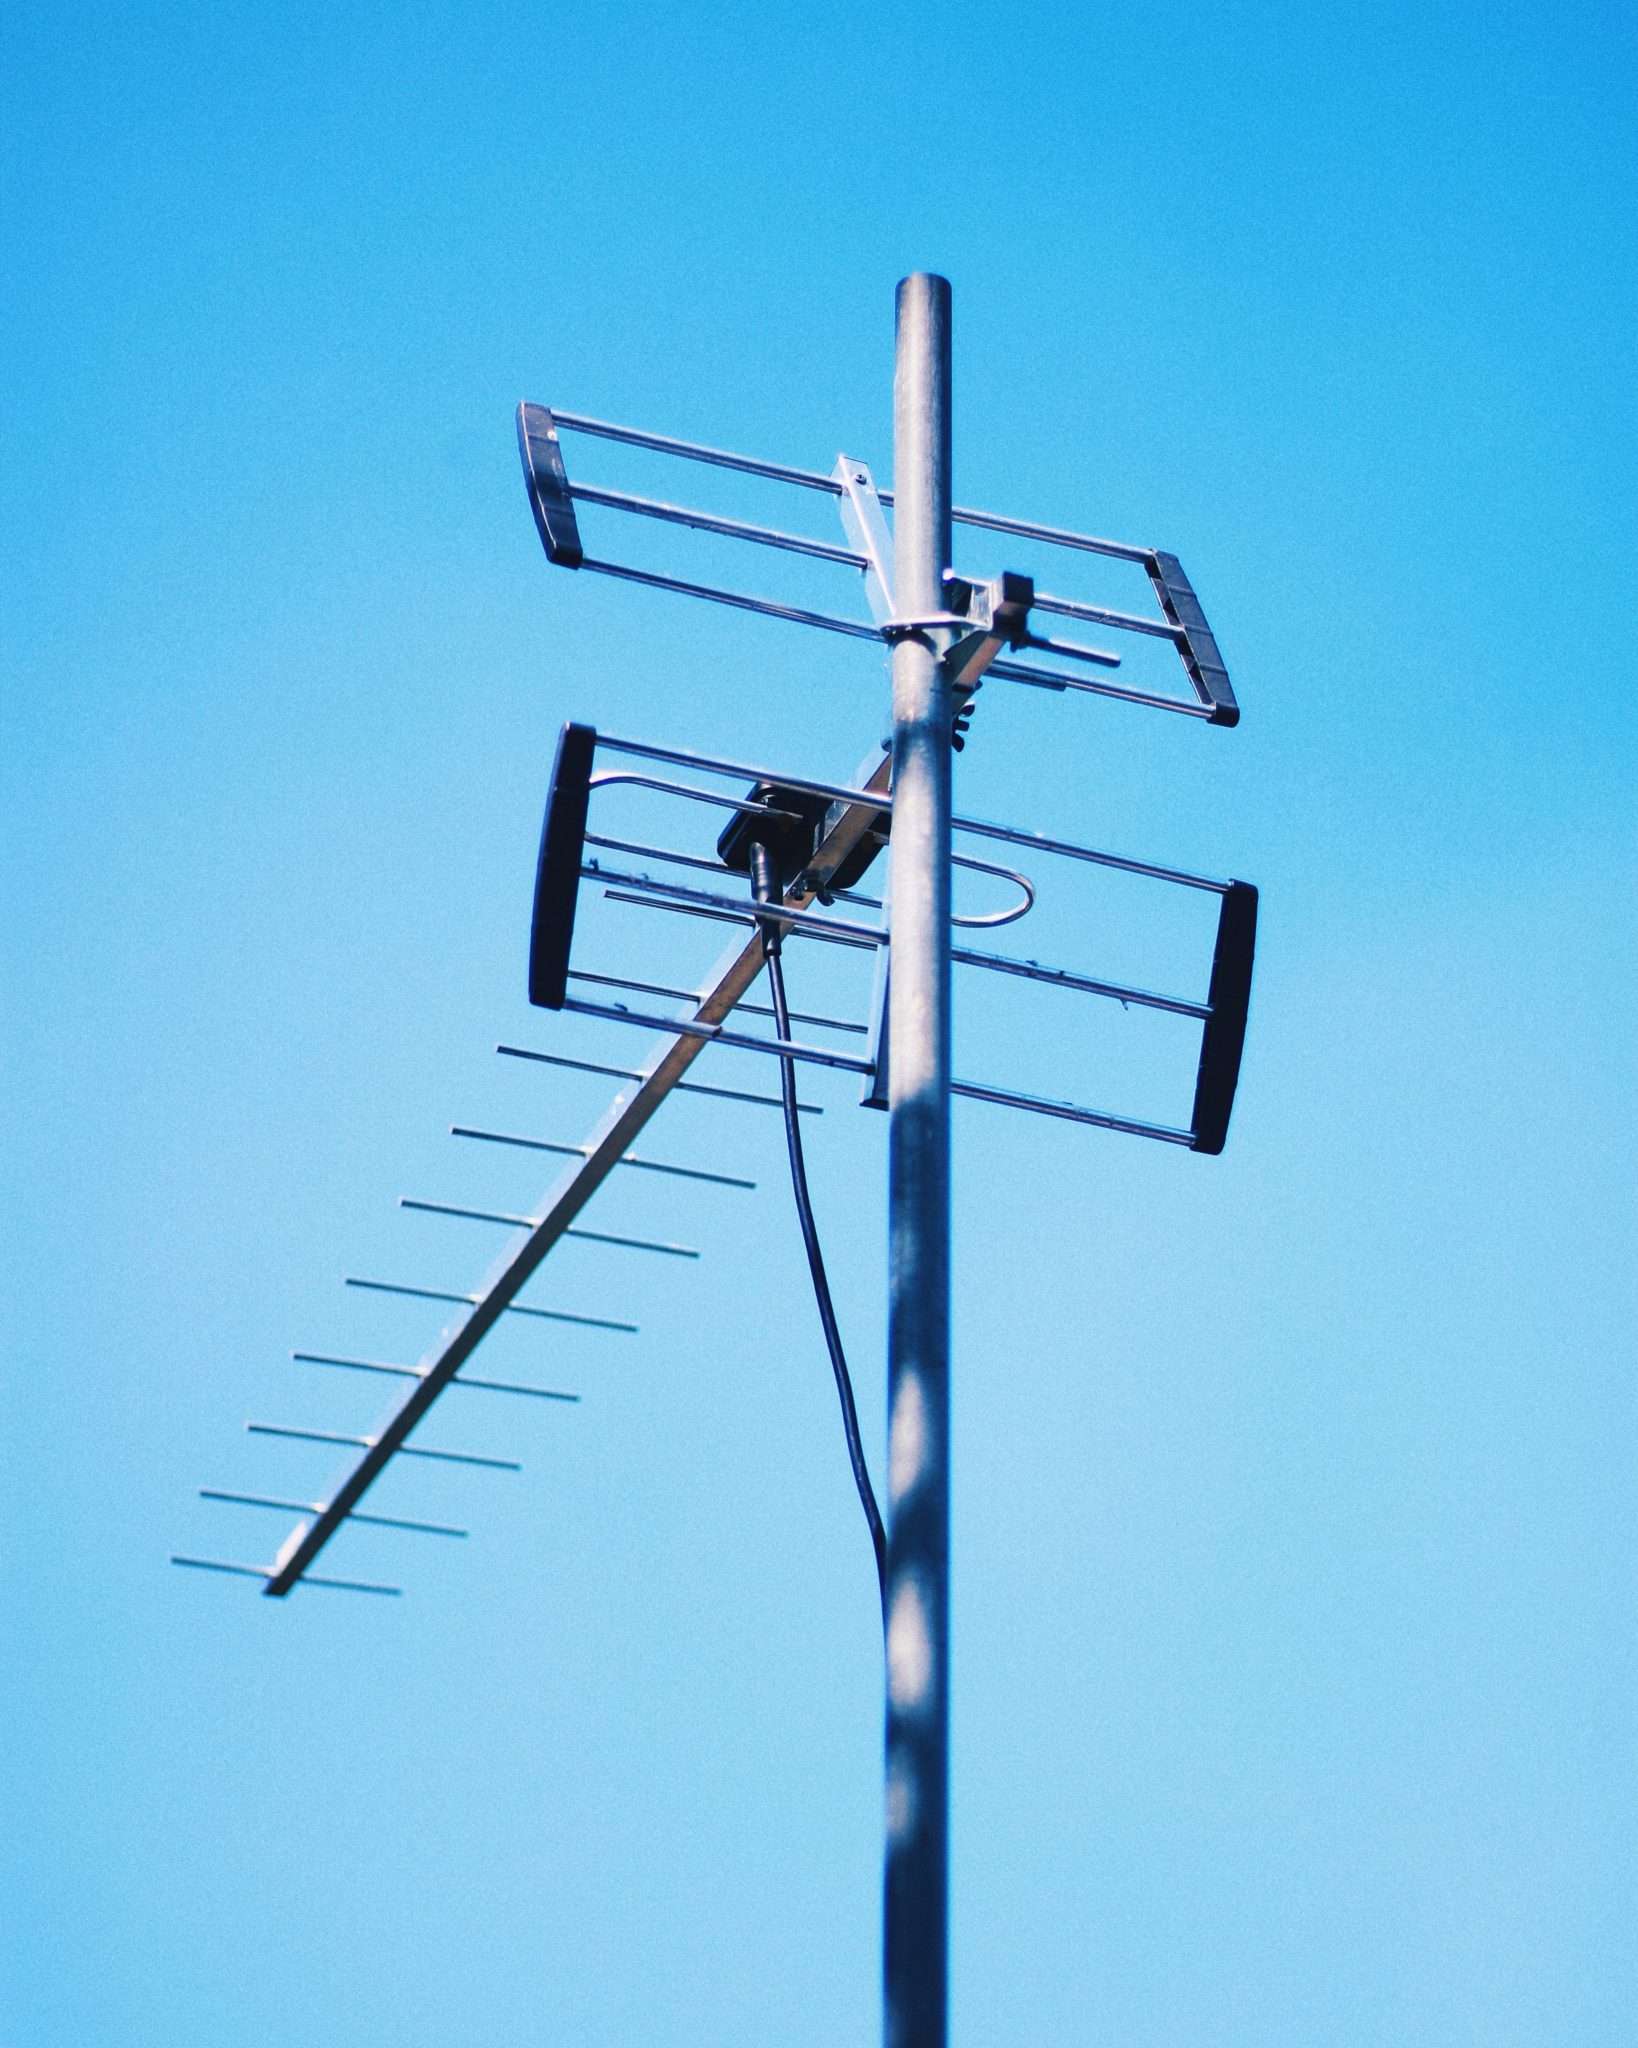 The Best Outdoor TV Antennas for Rural Areas